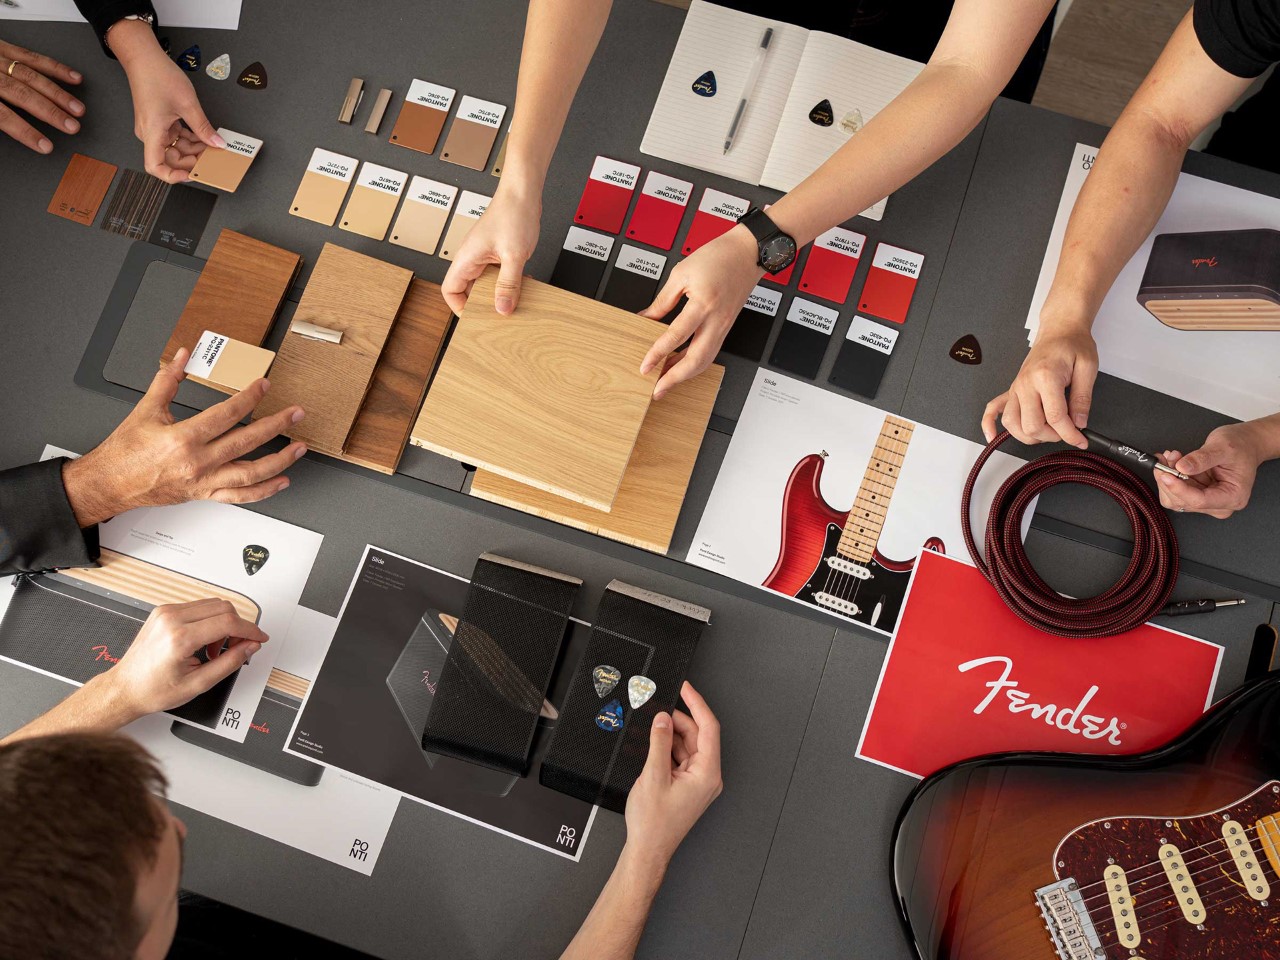 Fender Unveils A Hybrid Bluetooth Speaker + Portable Amp That Lets You Jam To Your Favorite Tunes